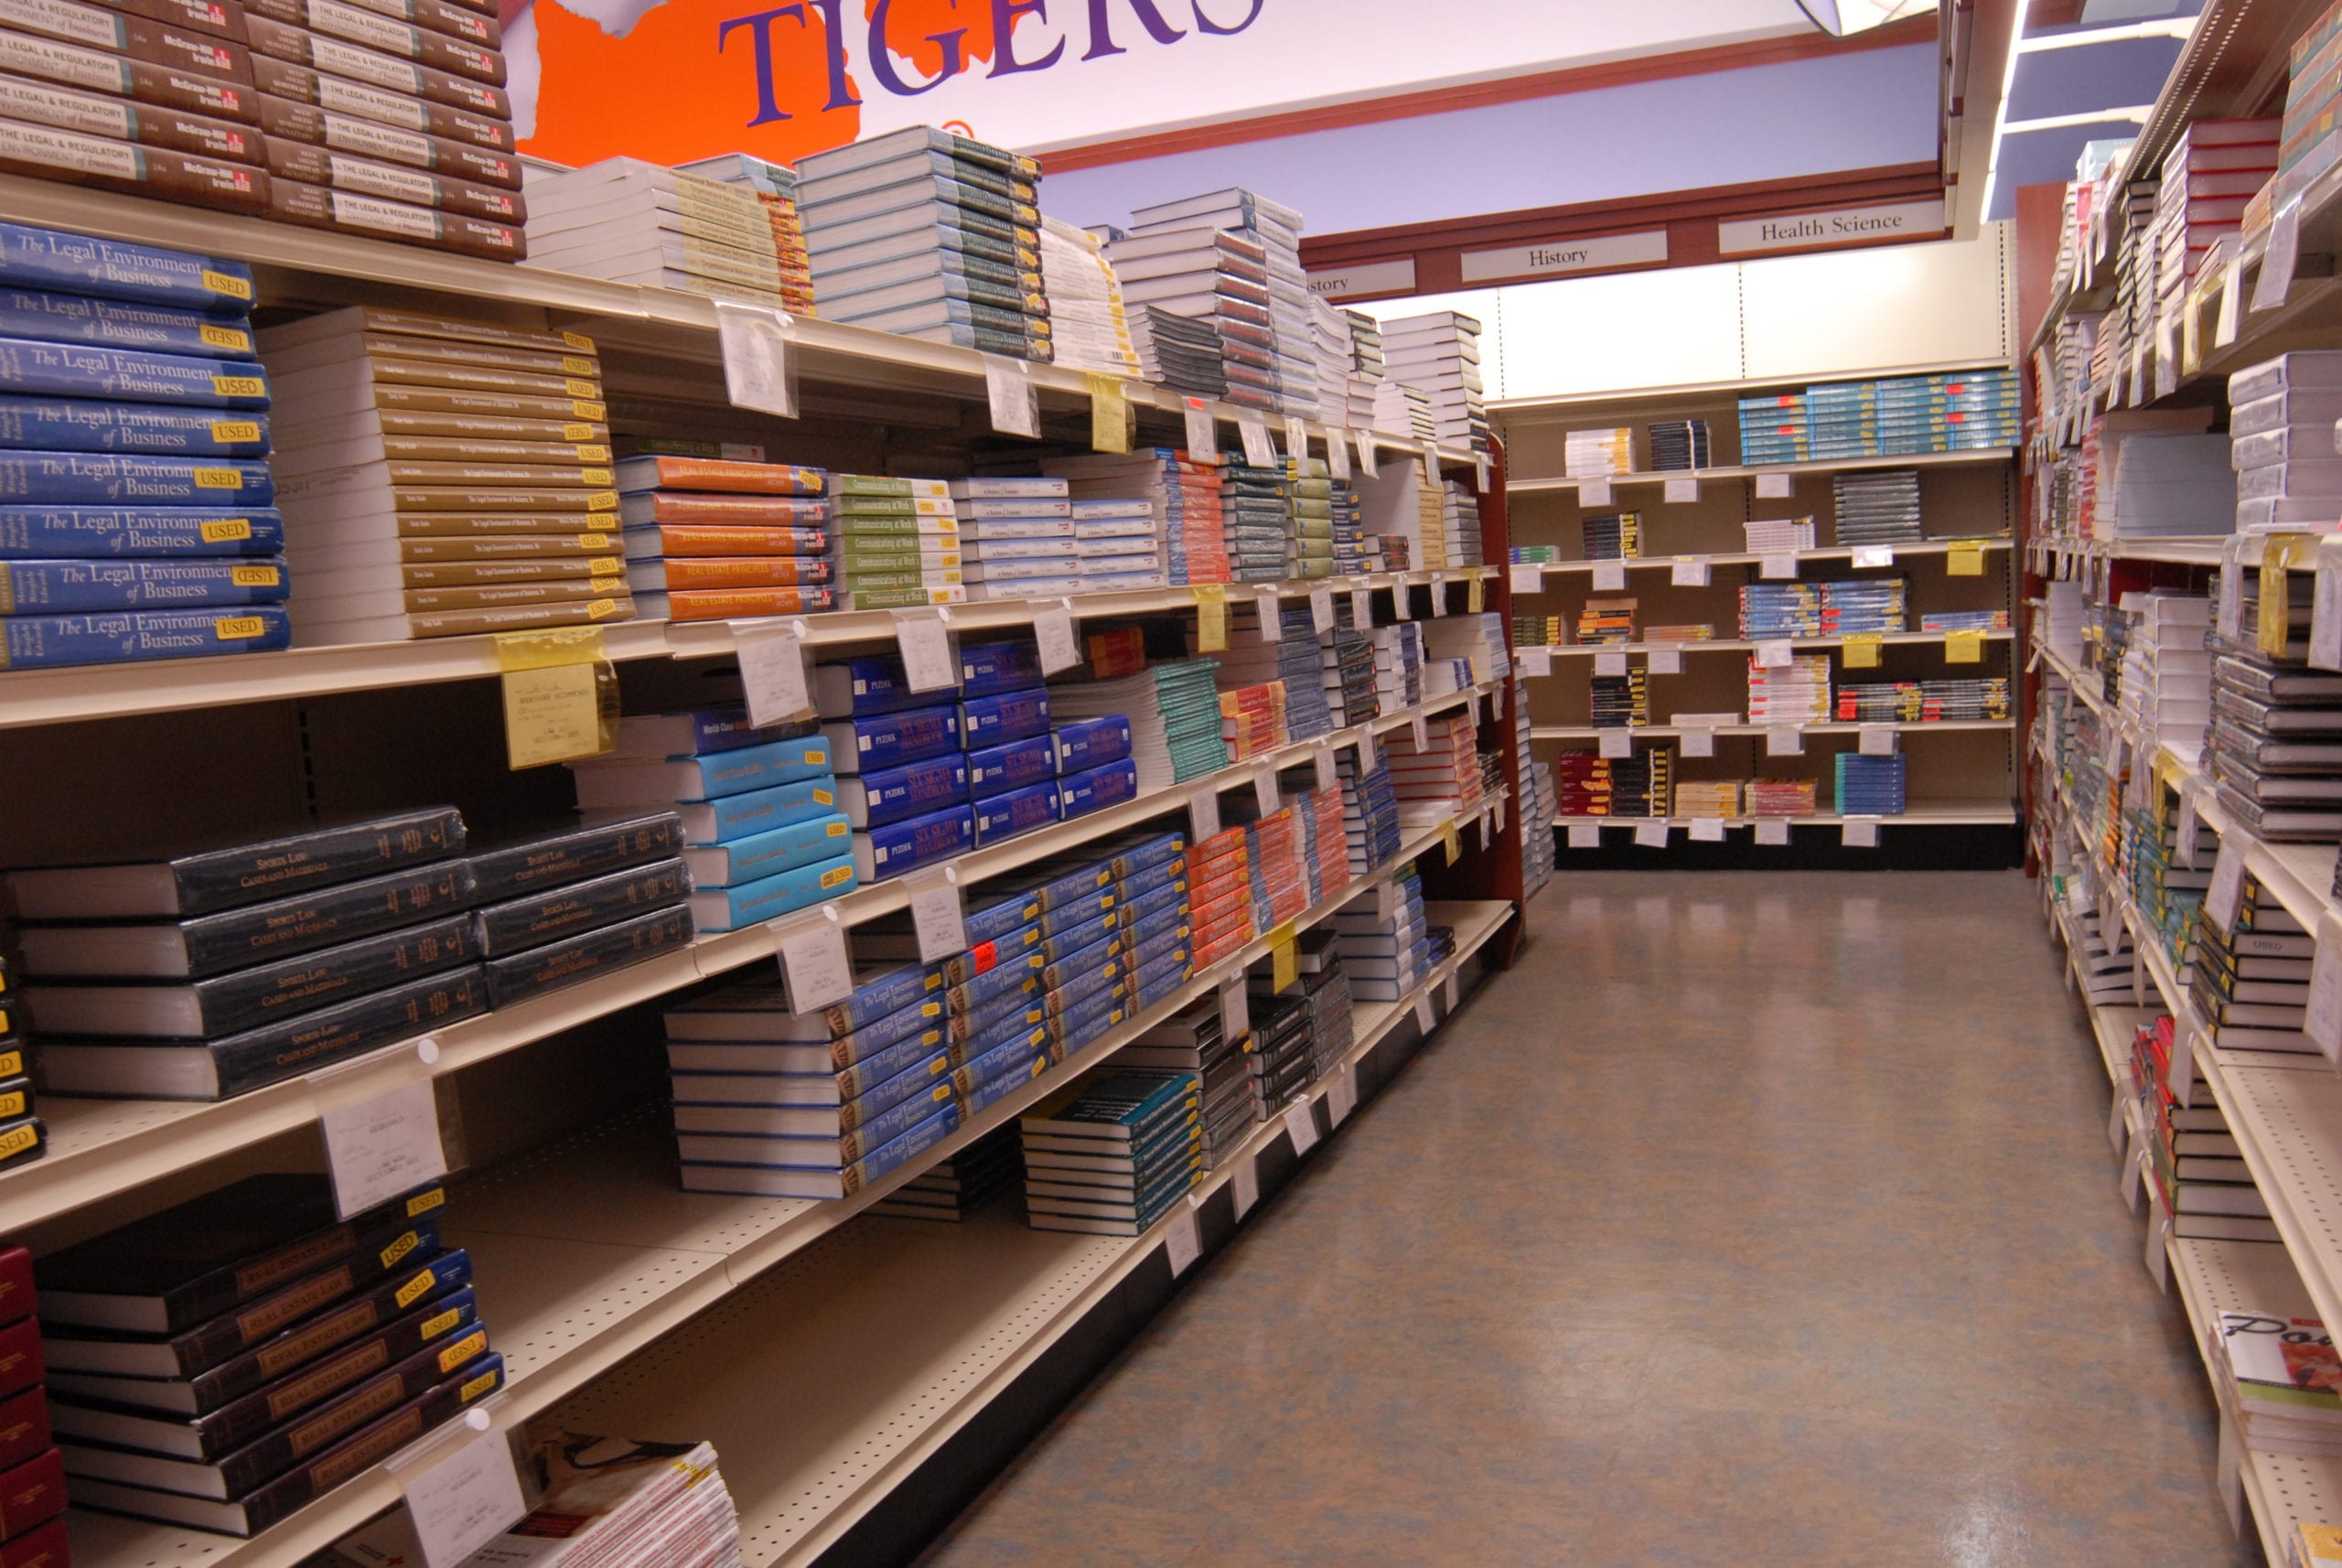 A long, high row of textbooks in a store.